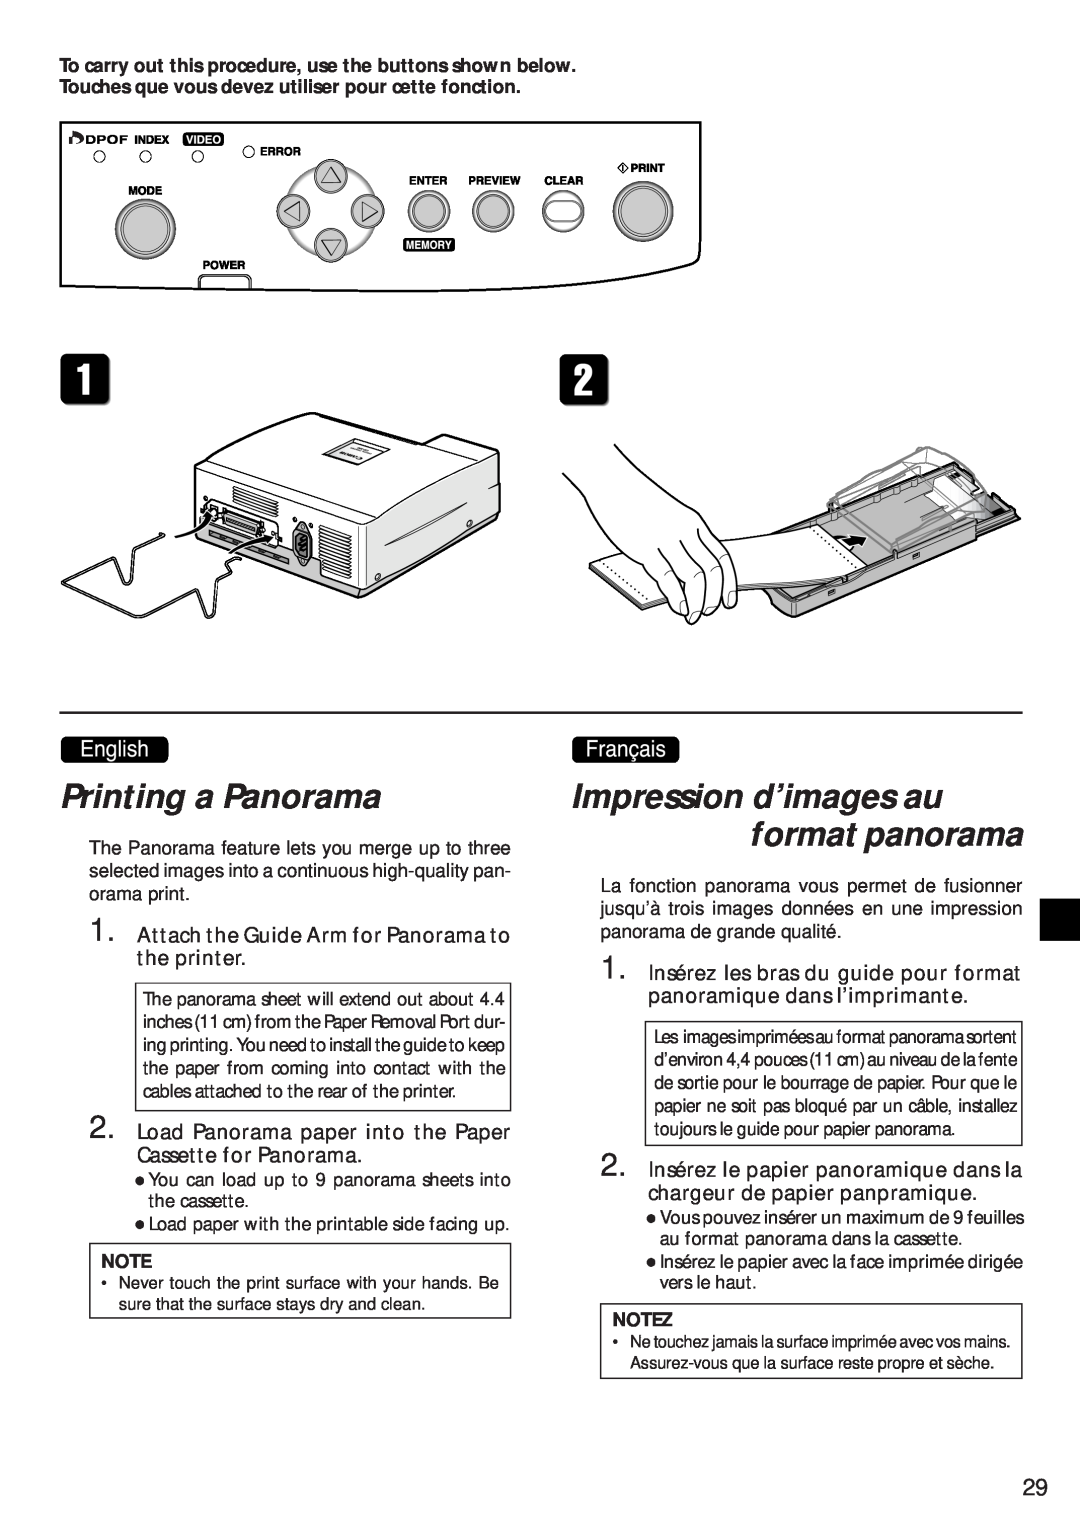 Canon CD-300 Printing a Panorama, Impression d’images au format panorama, Attach the Guide Arm for Panorama to the printer 